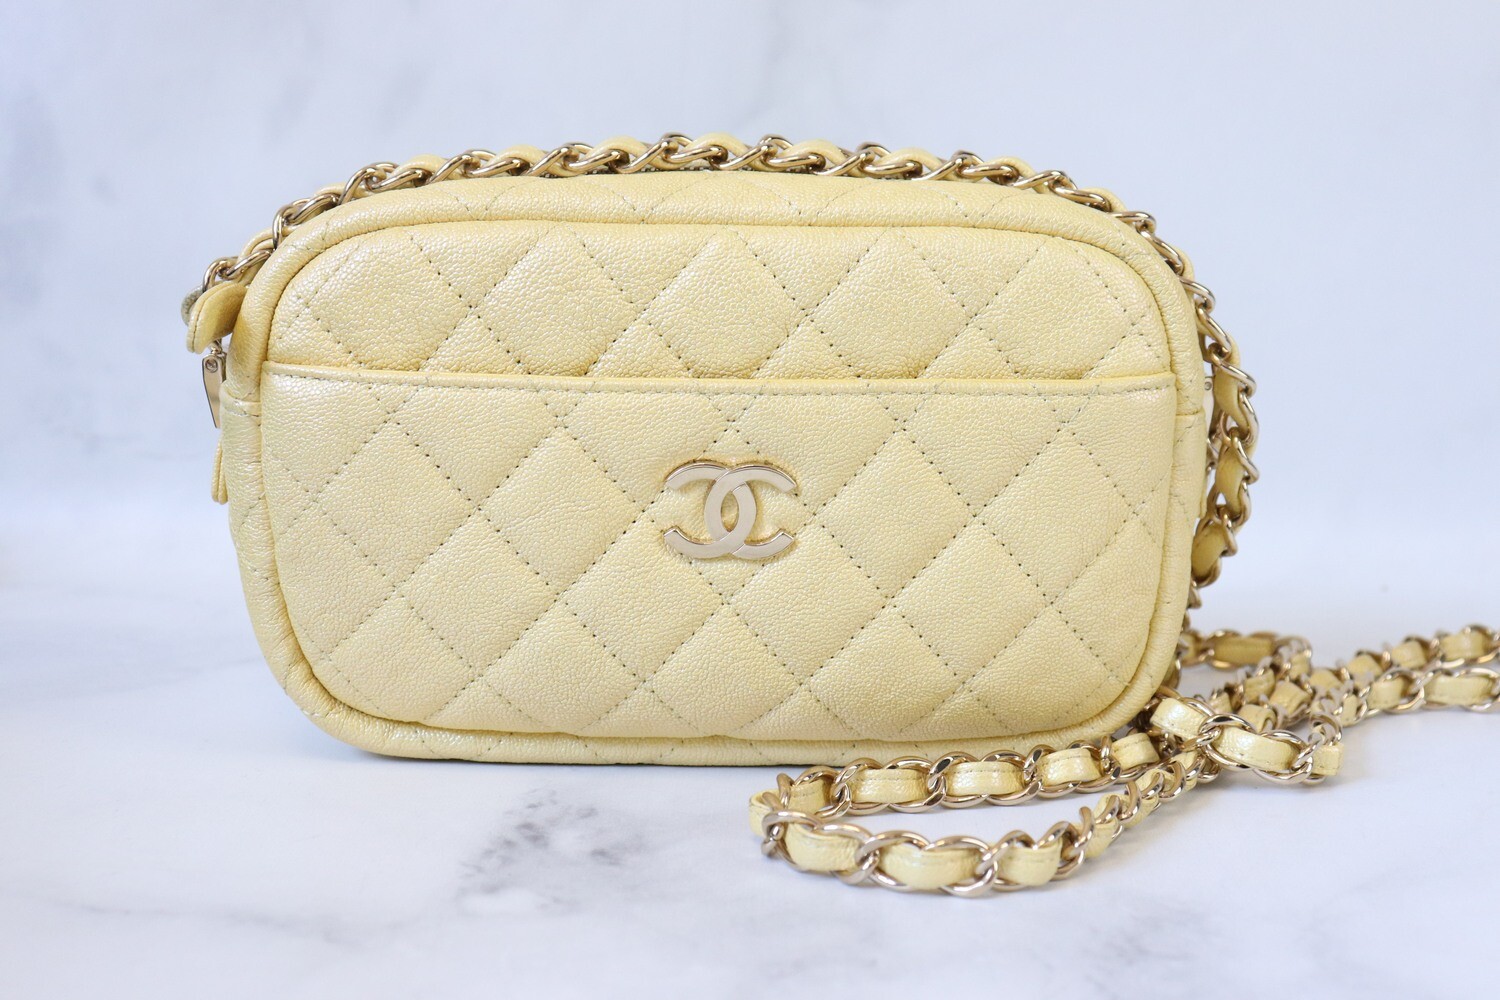 Chanel Camera Bag Small, Iridescent Yellow Caviar Leather with Gold Hardware,  Preowned in Dustbag - Julia Rose Boston